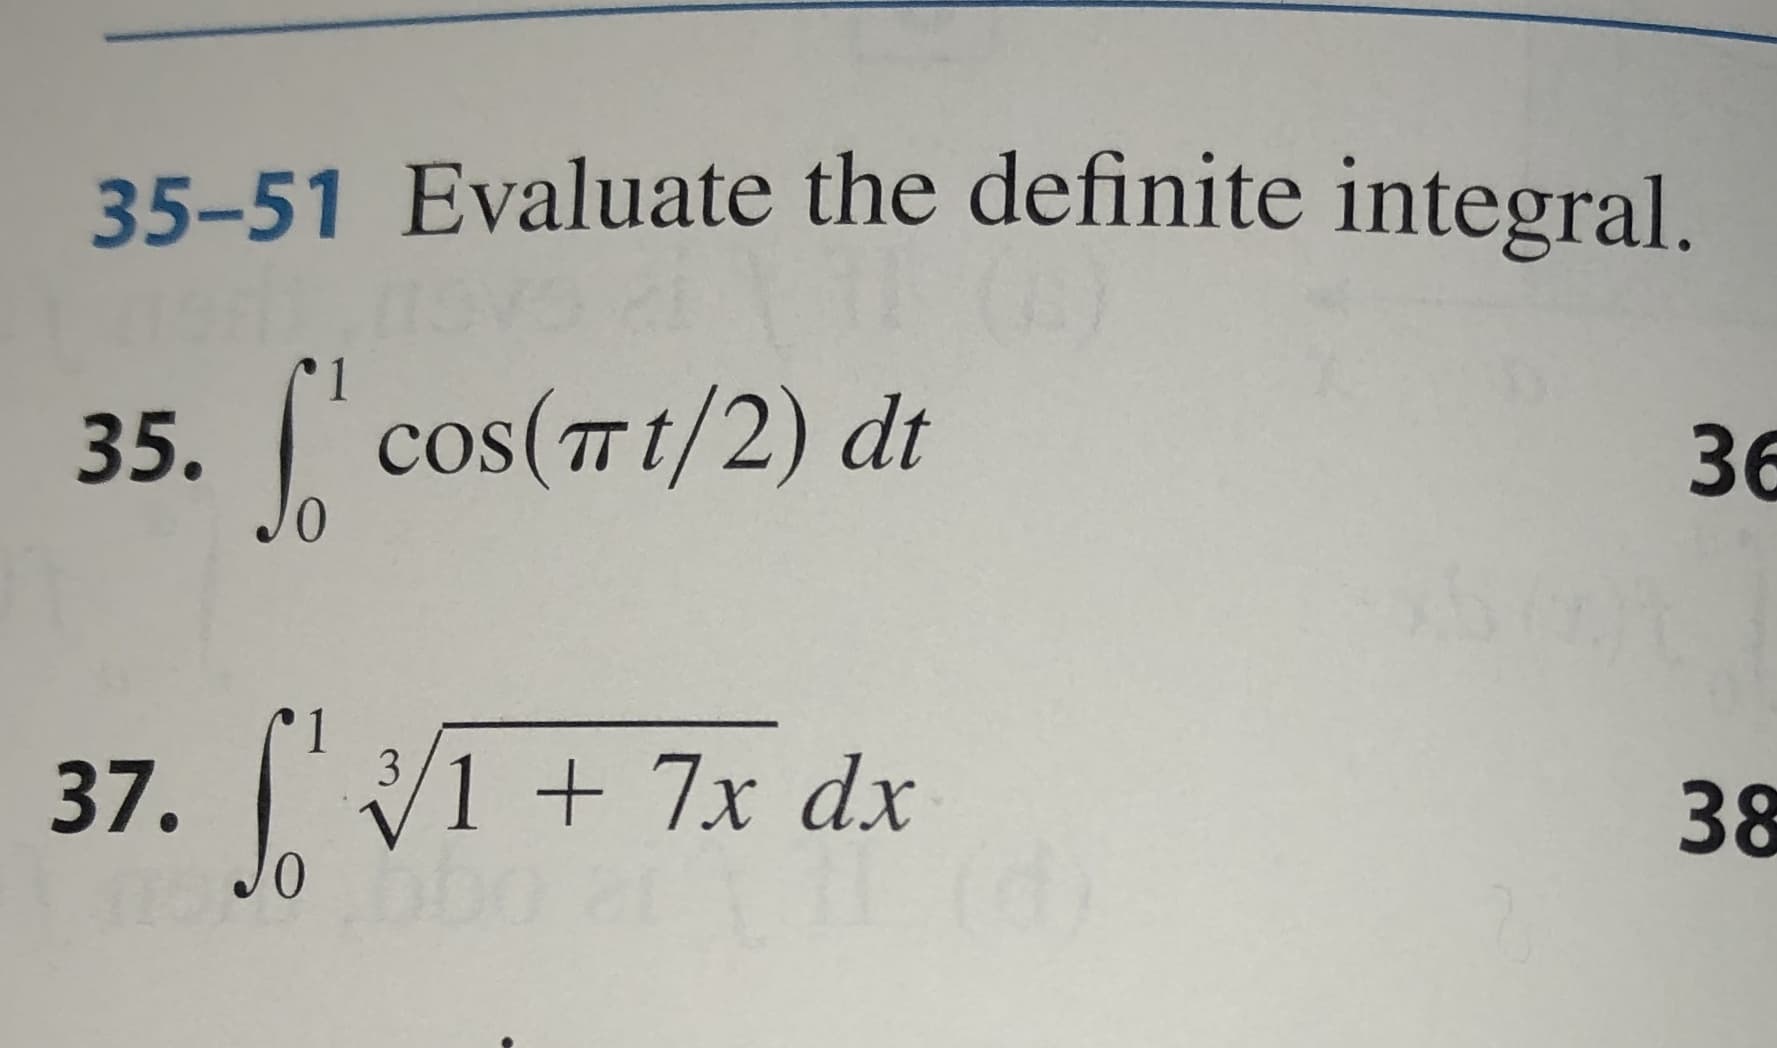 35-51 Evaluate the definite integral.
1
cos(Tt/2) dt
35.
3е
0
/1 +7x dx
37.
38
